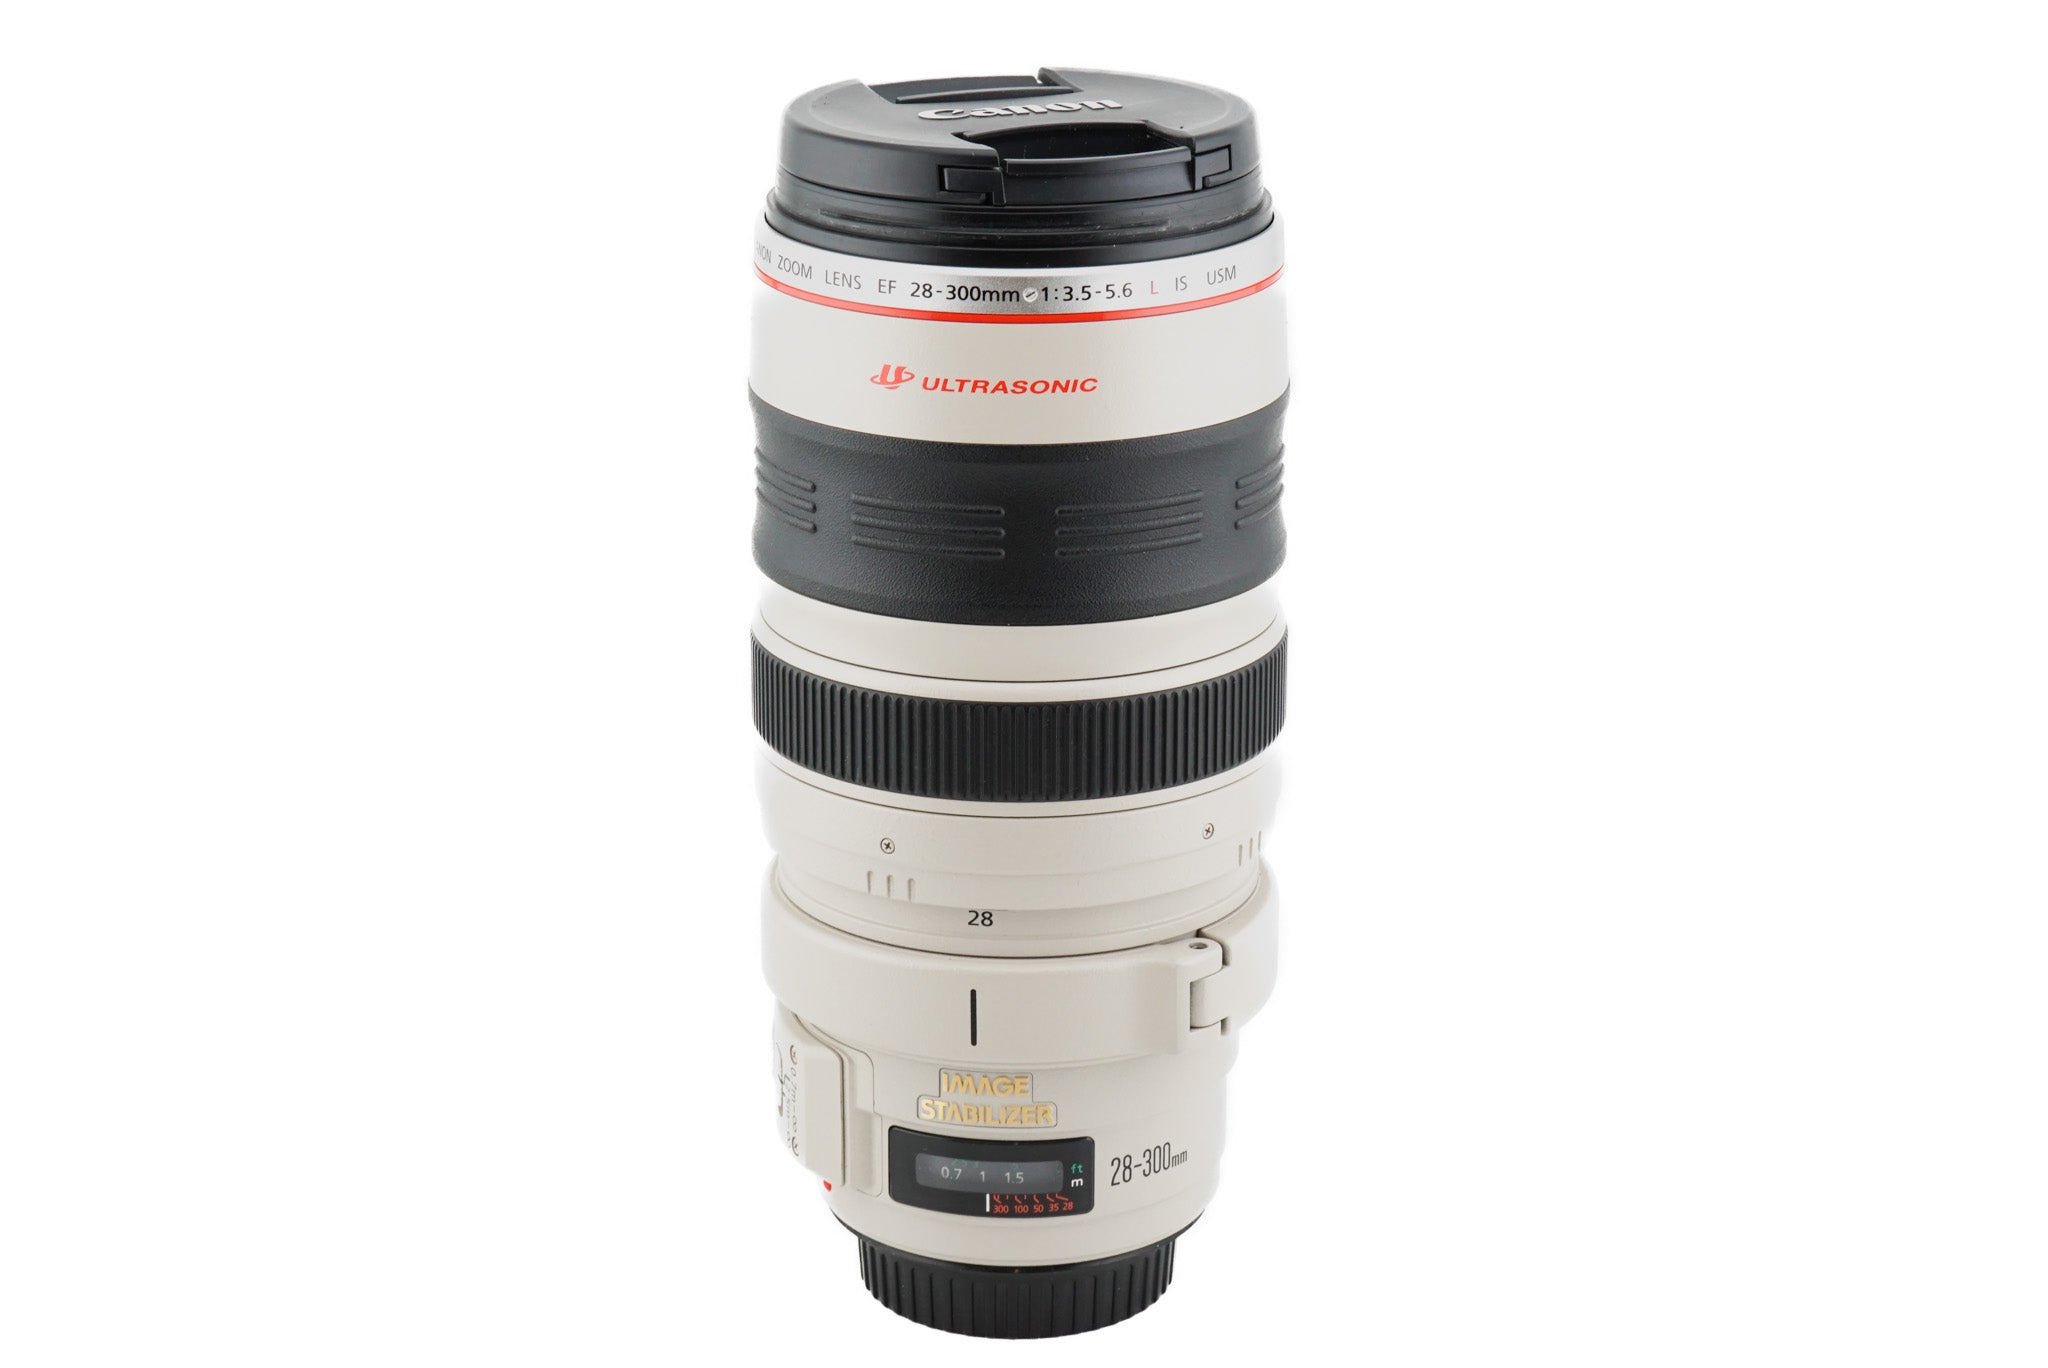 Canon 28-300mm f3.5-5.6 L IS USM - Lens